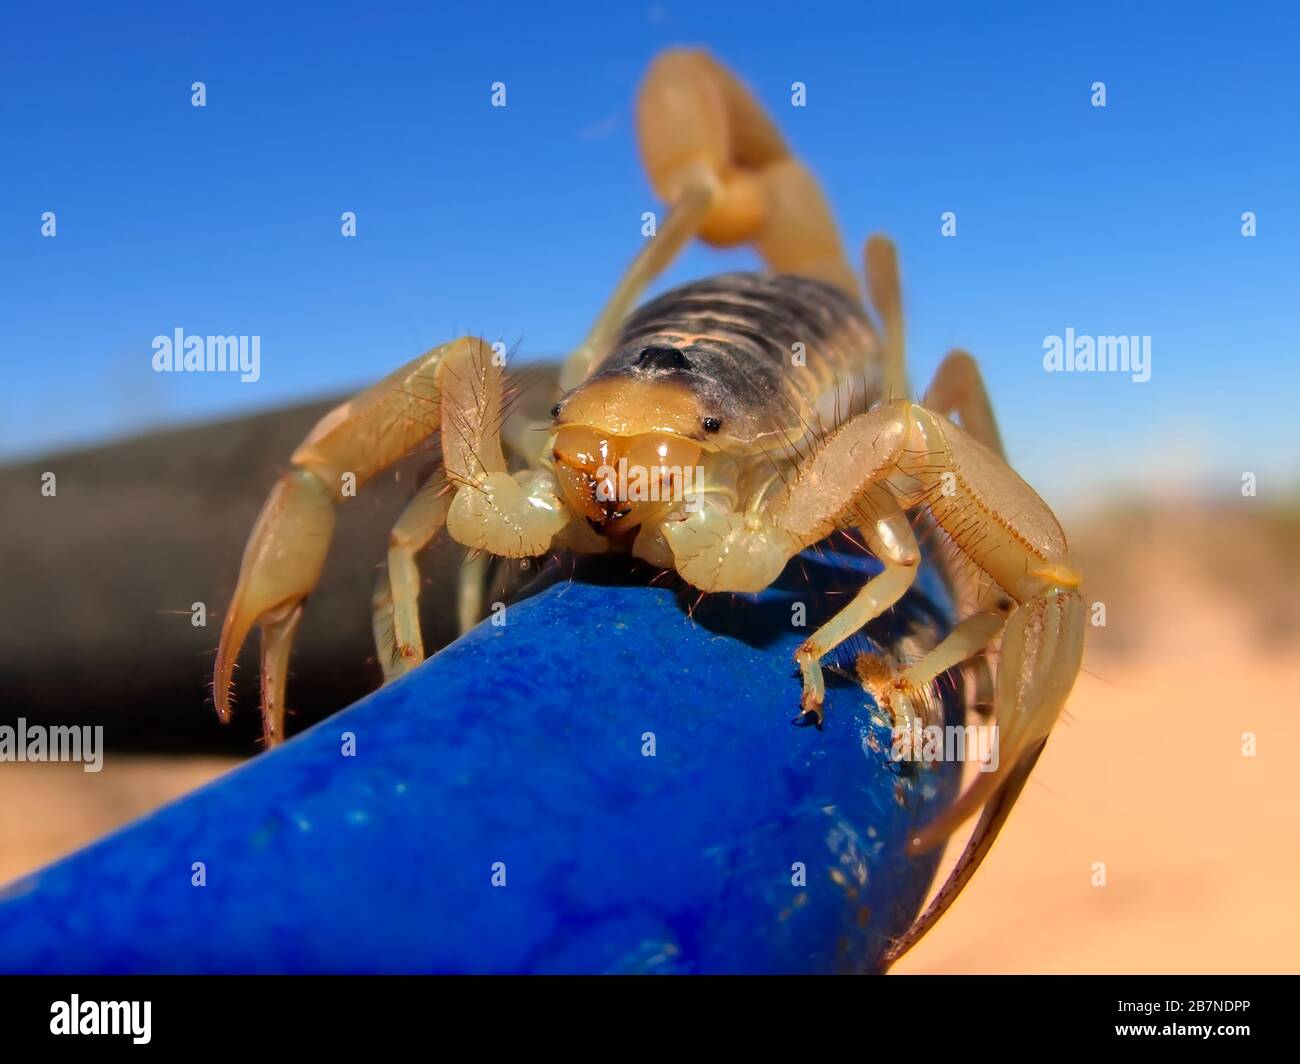 A closeup view of a Giant Hairy Scorpion native to Arizona climbing on a metal pipe. Stock Photo